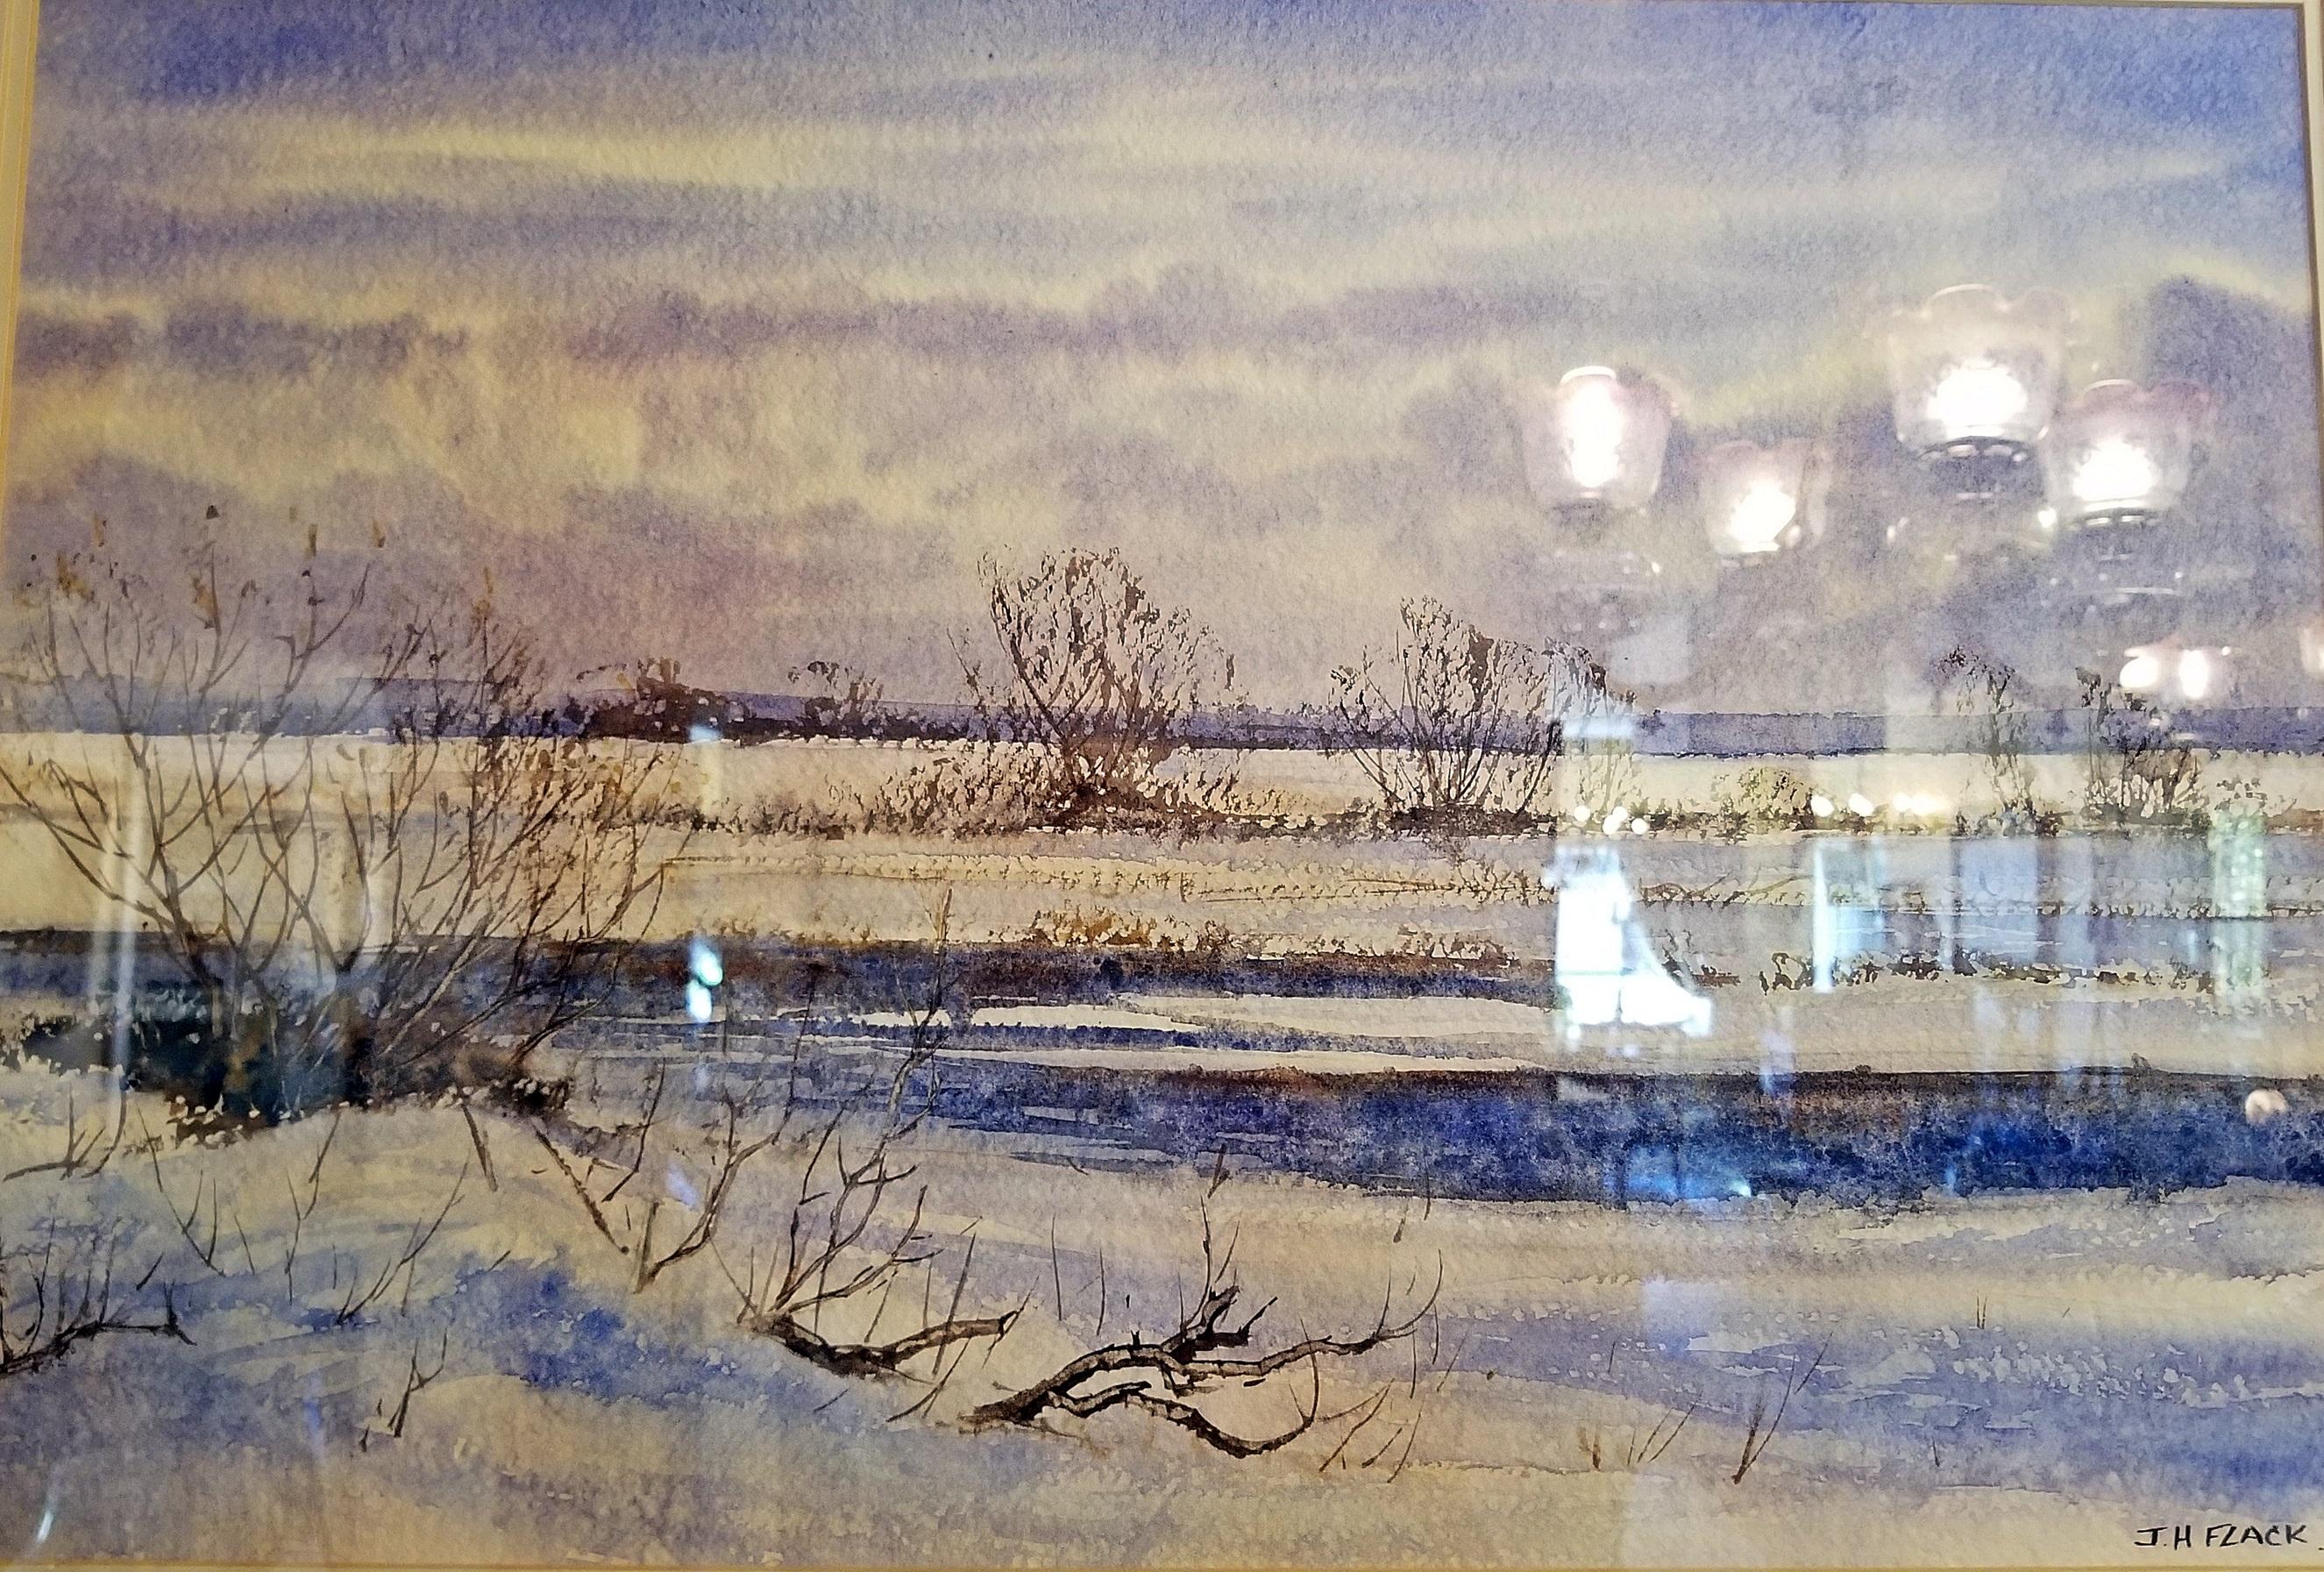 Country Irish Watercolor by Rev JH Flack of Winter on 'The Bog of Allen' For Sale